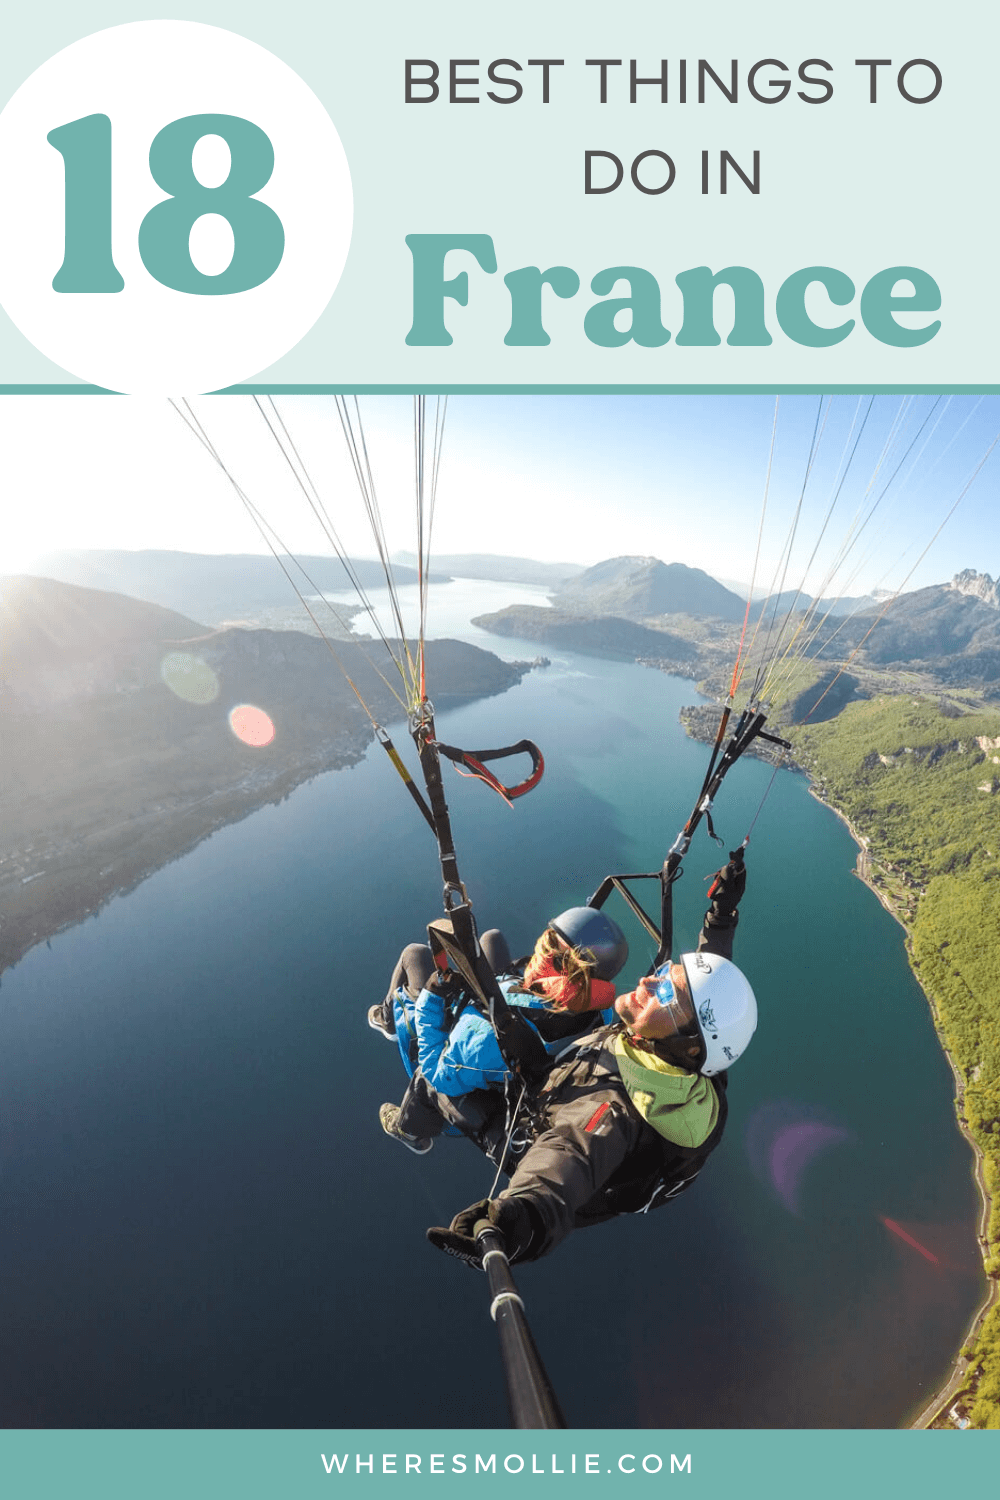 The best things to do in France